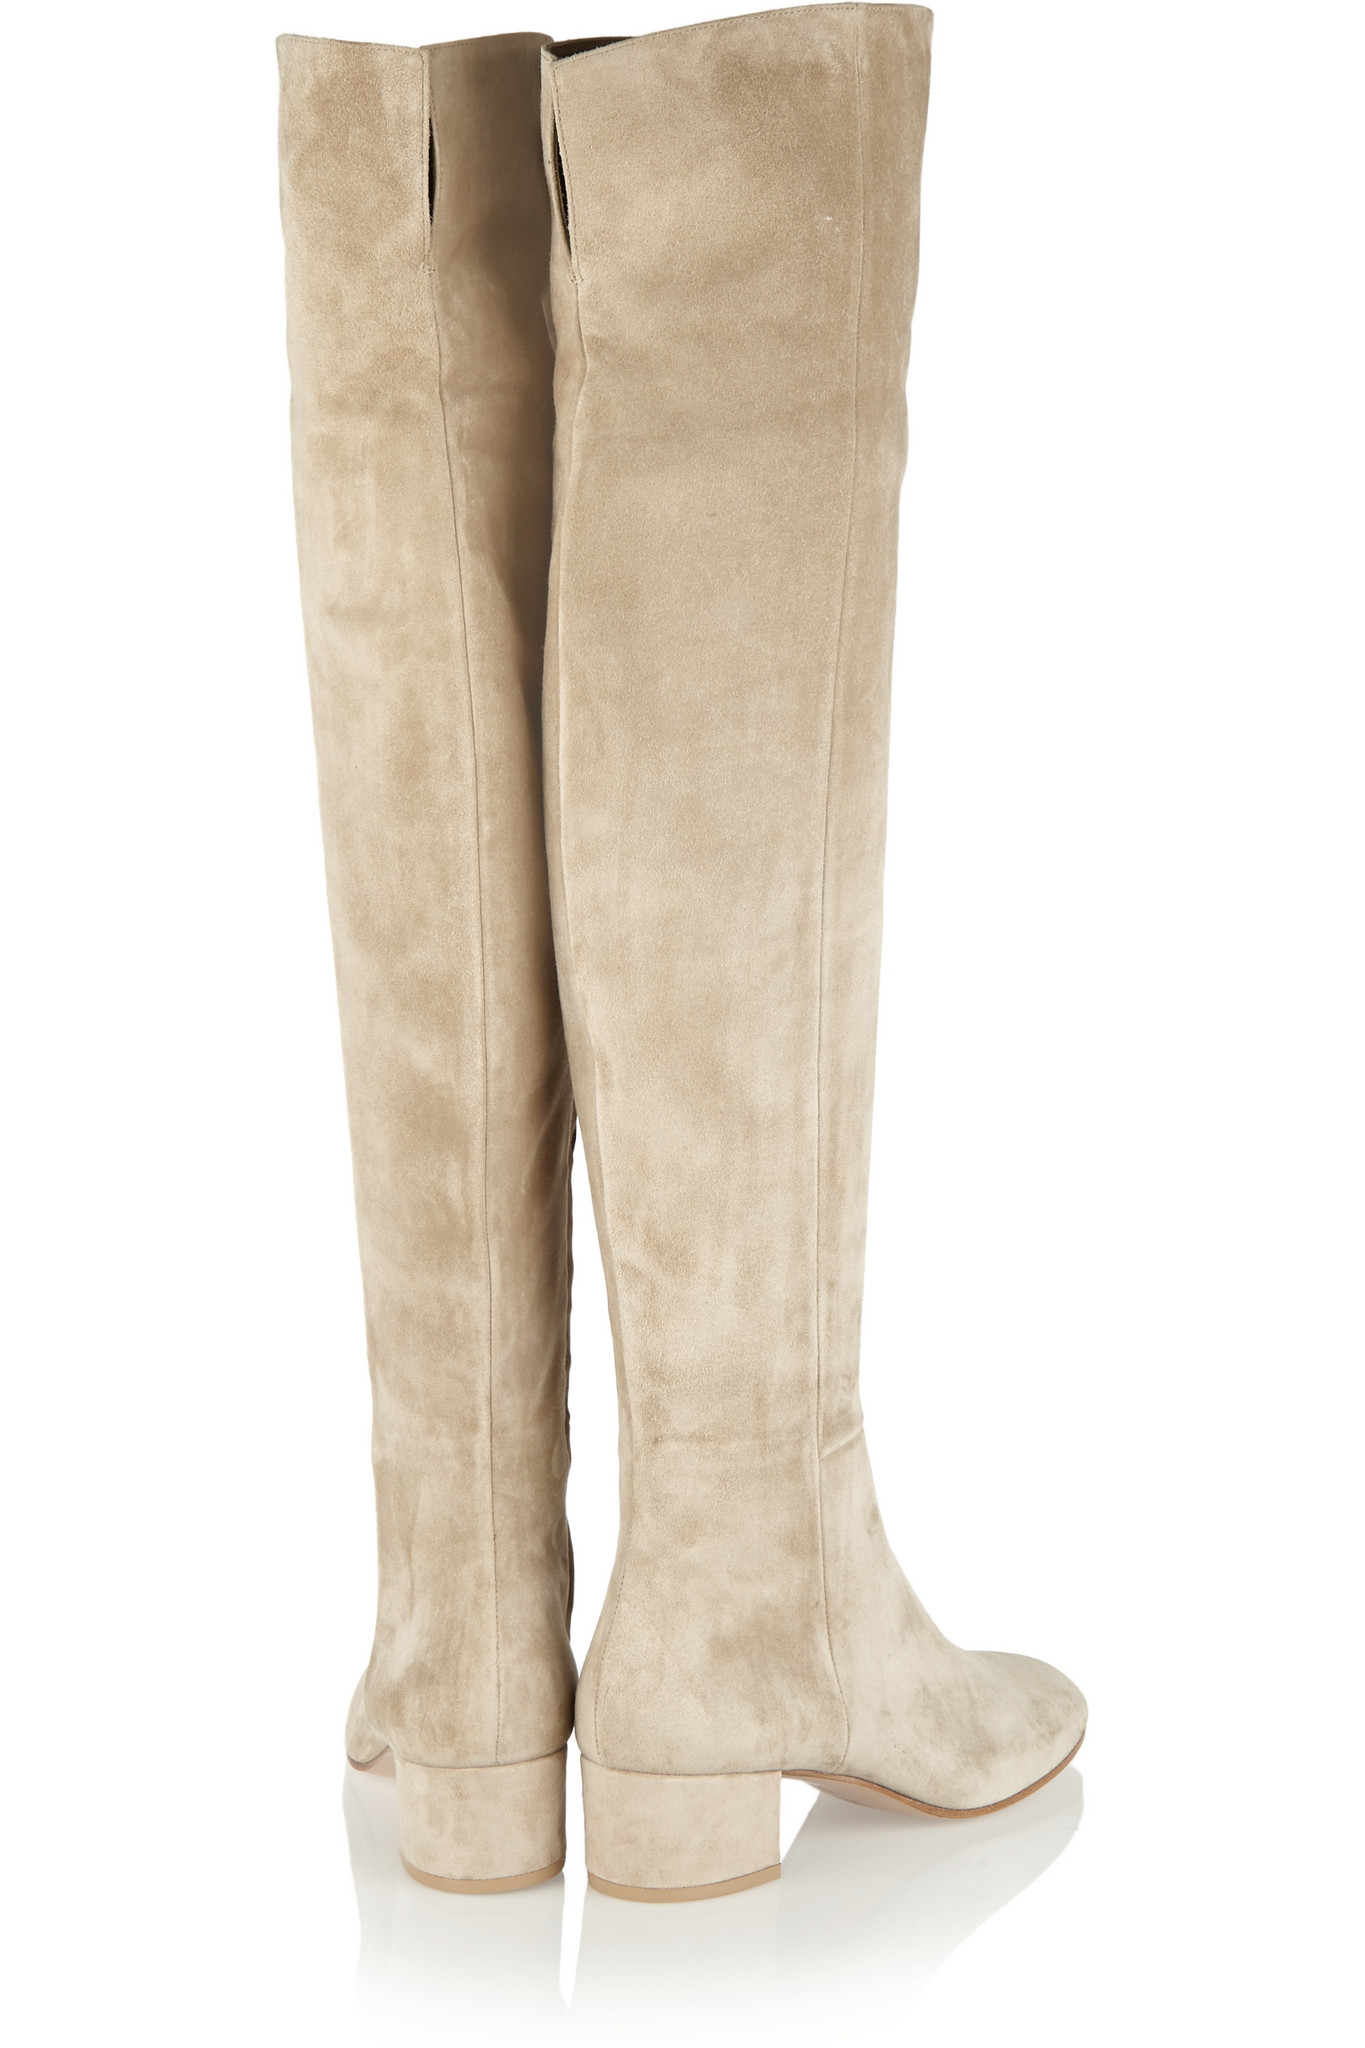 Lyst - Gianvito Rossi Suede Over-the-knee Boots